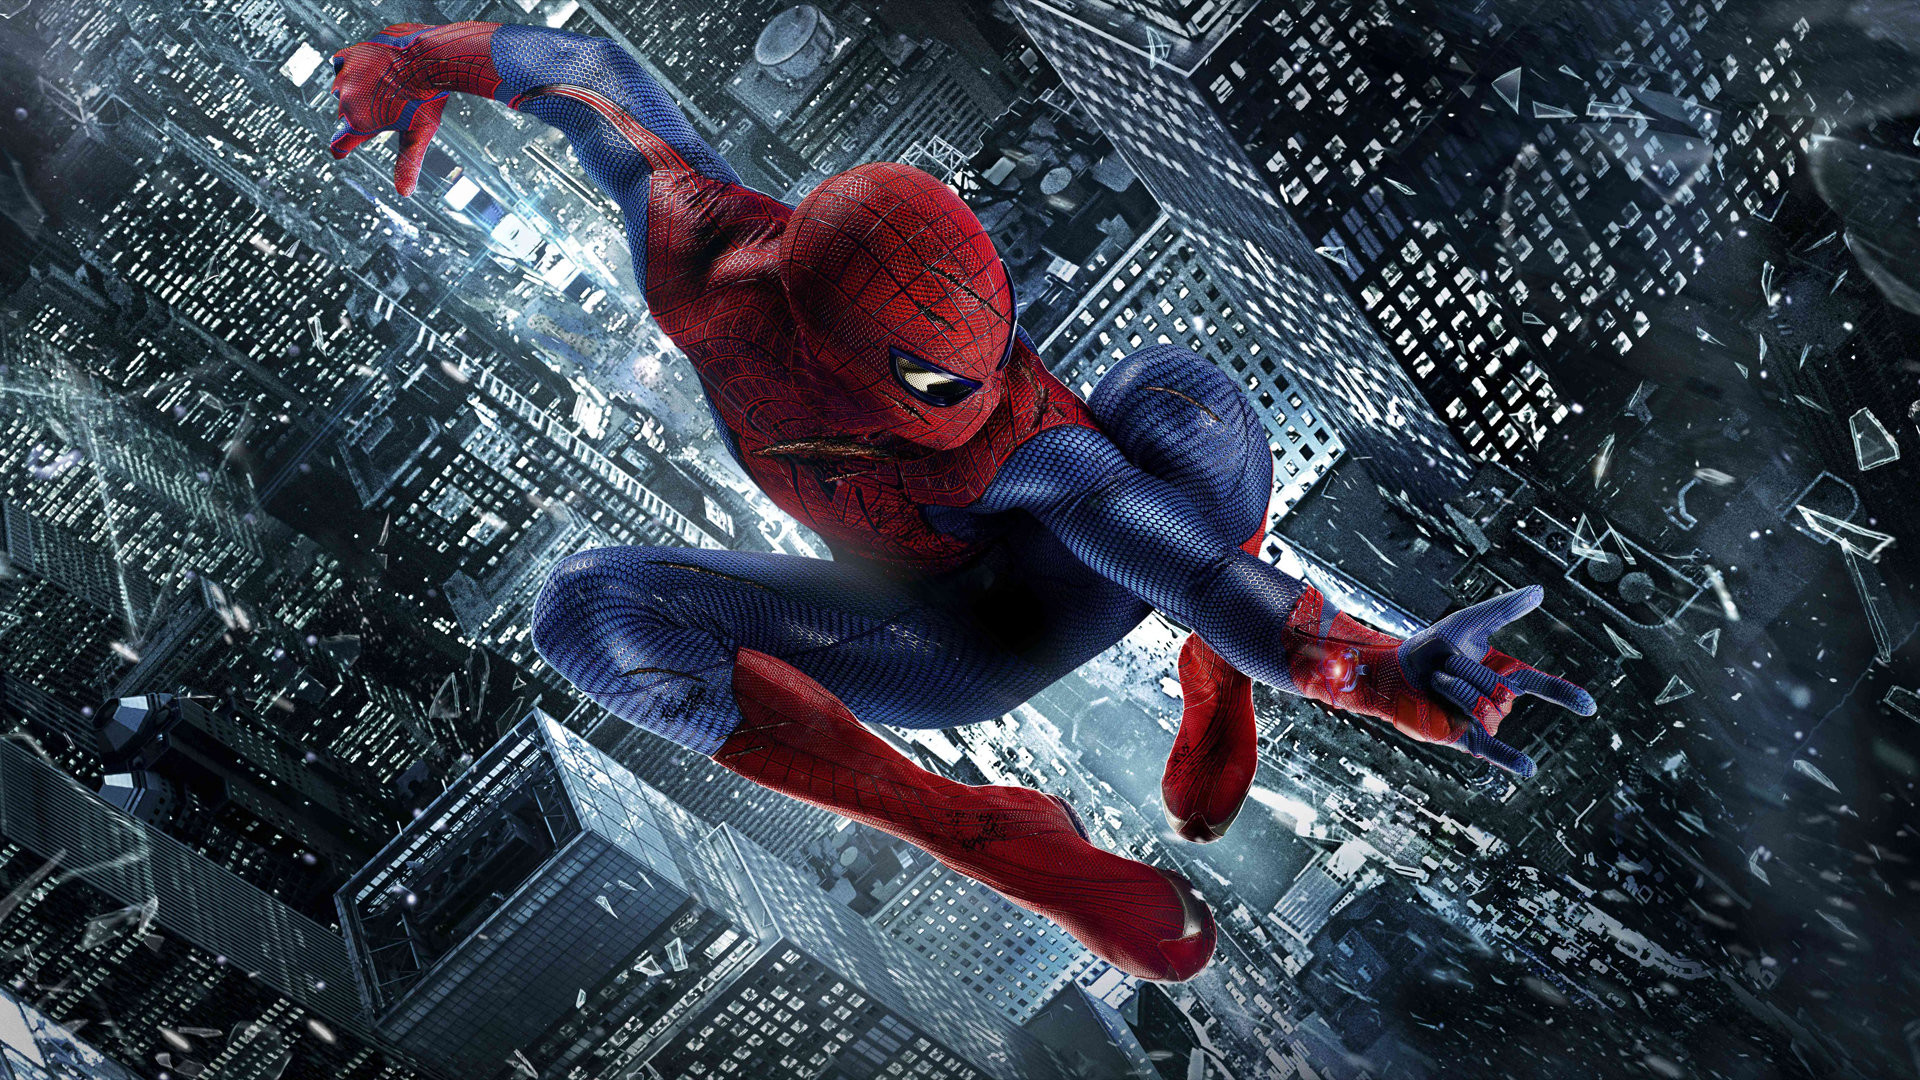 1920x1080 The Amazing Spider Man HD Wallpapers Desktop Backgrounds The 1920Ã1080 Spiderman  Wallpaper Hd (